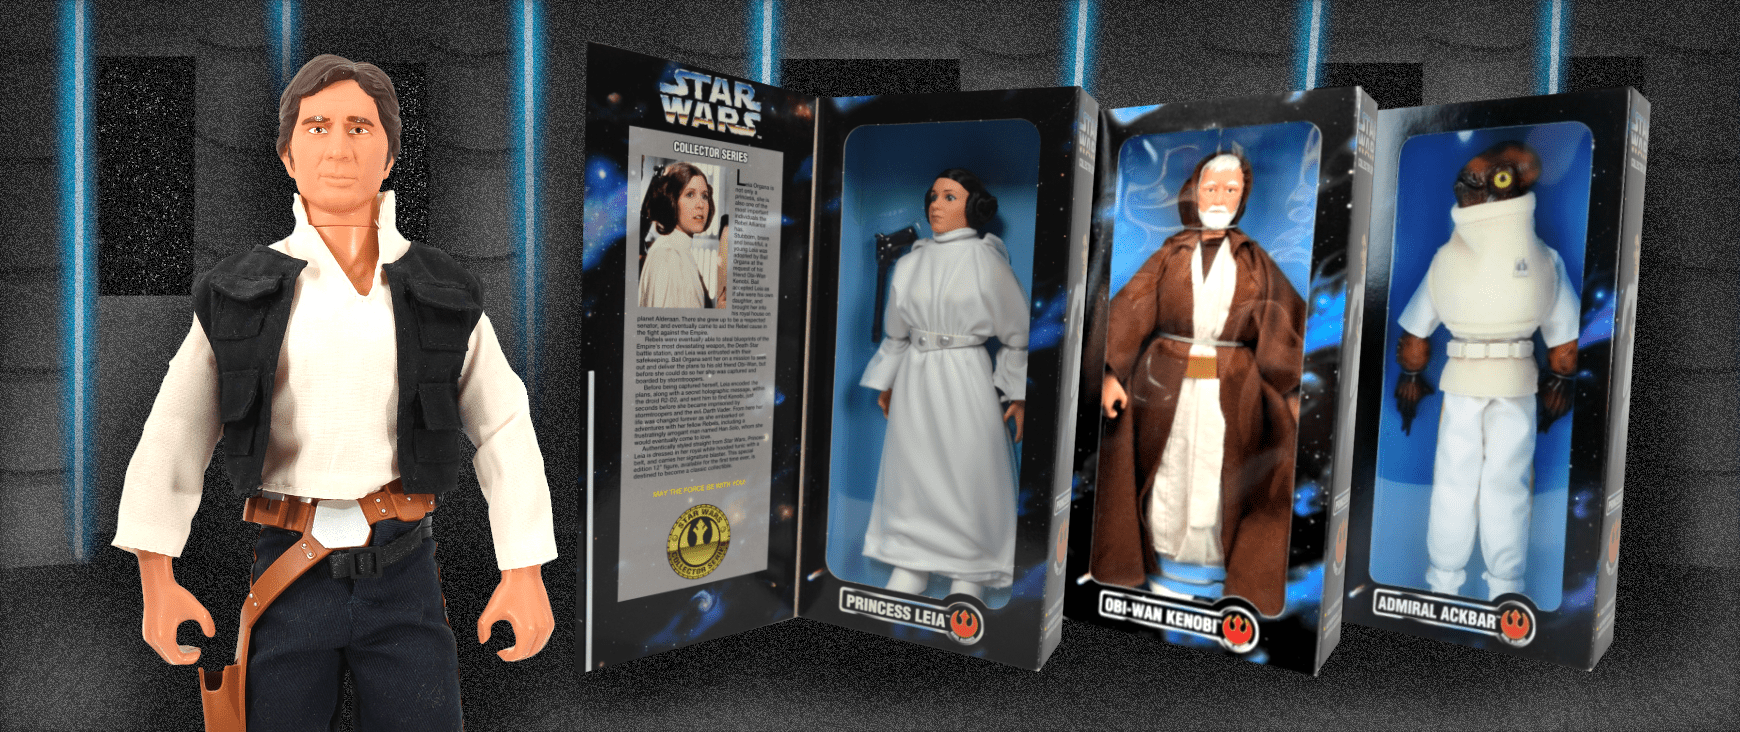 https://www.90stoys.com/app/uploads/2022/11/star-wars-collector-series-12-inch-figures-1996.png